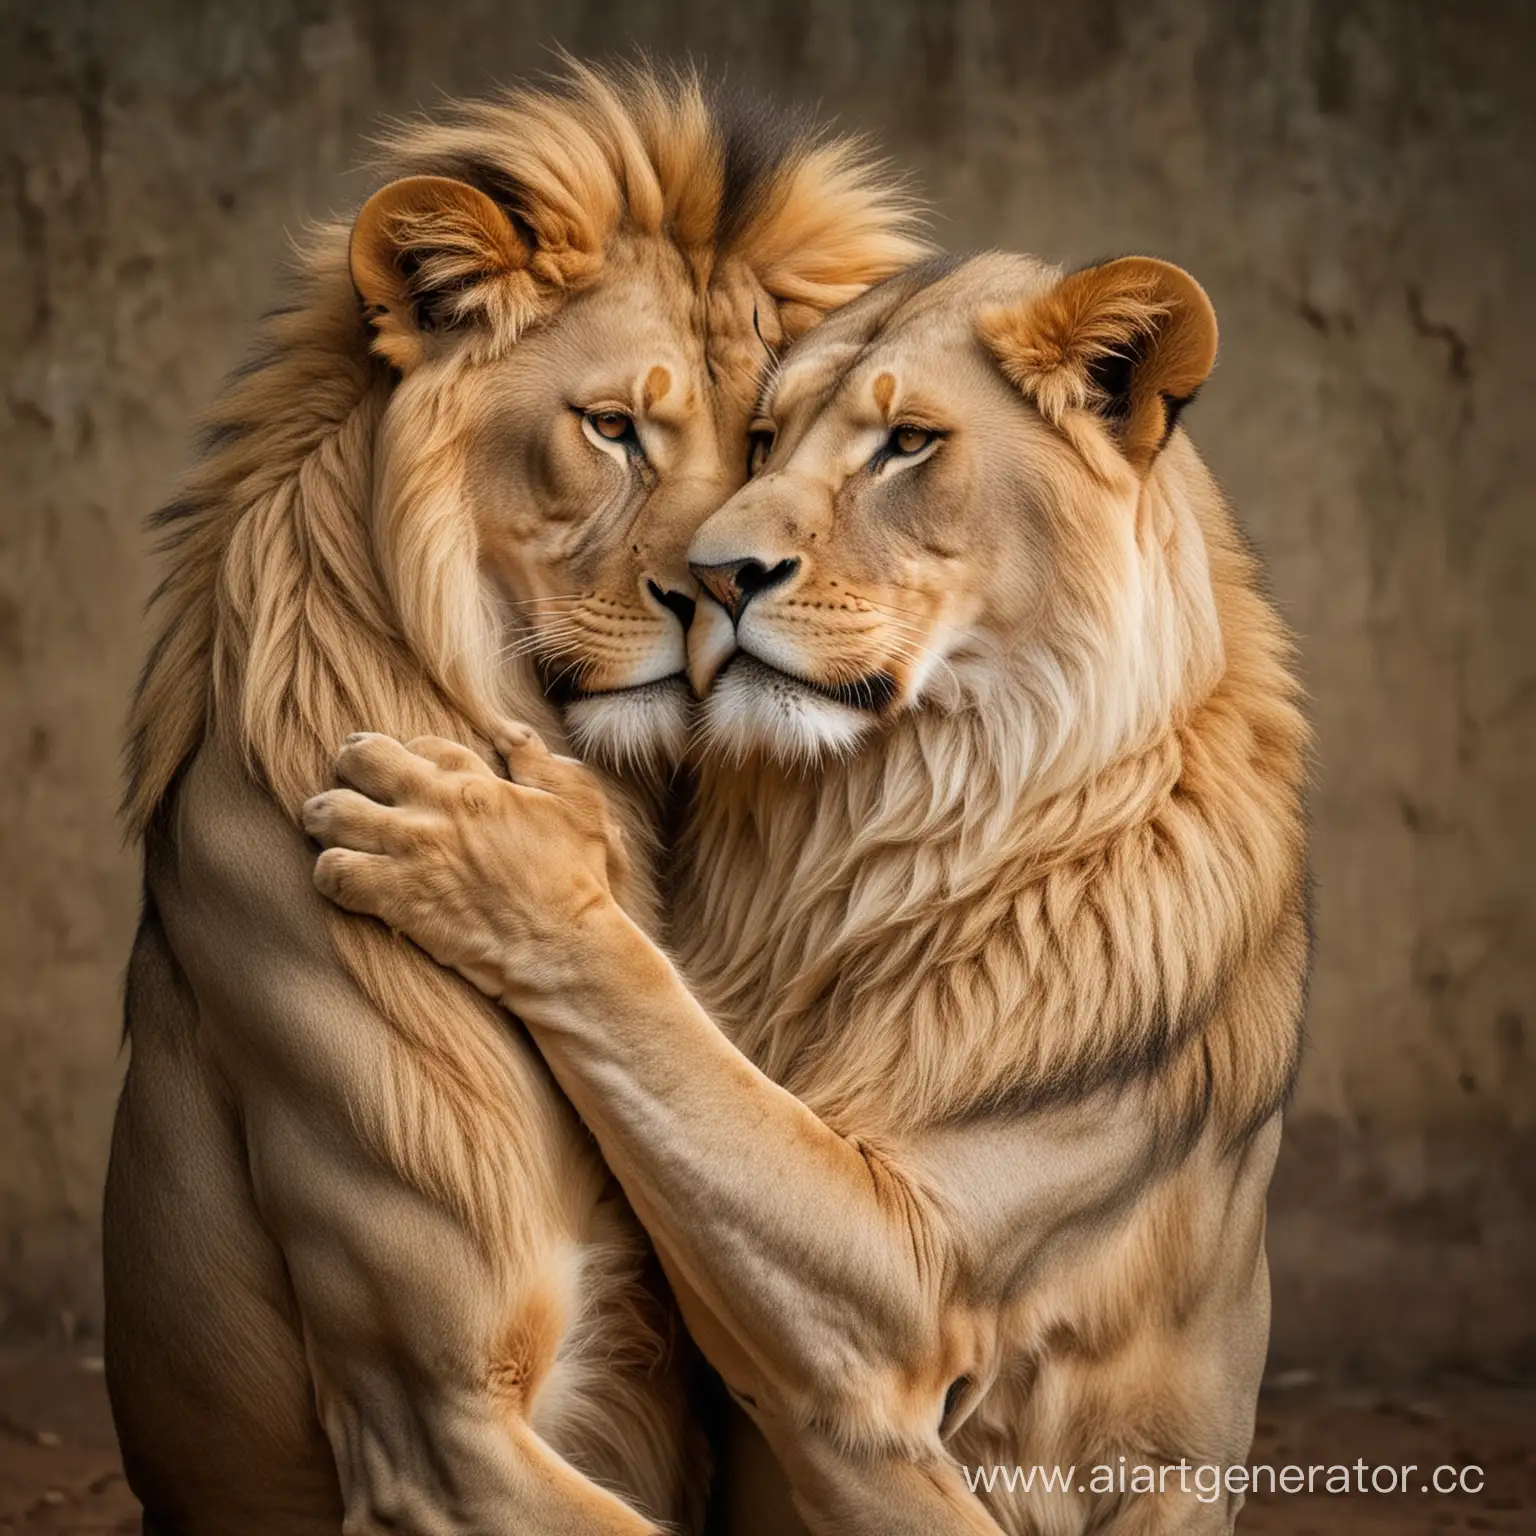 The lion stands in a human pose and embraces the lioness, The lion is full of feelings, the lion wraps his arms around the lioness, the lioness is spoilt by his embrace, the lion frowns his eyebrows sadly